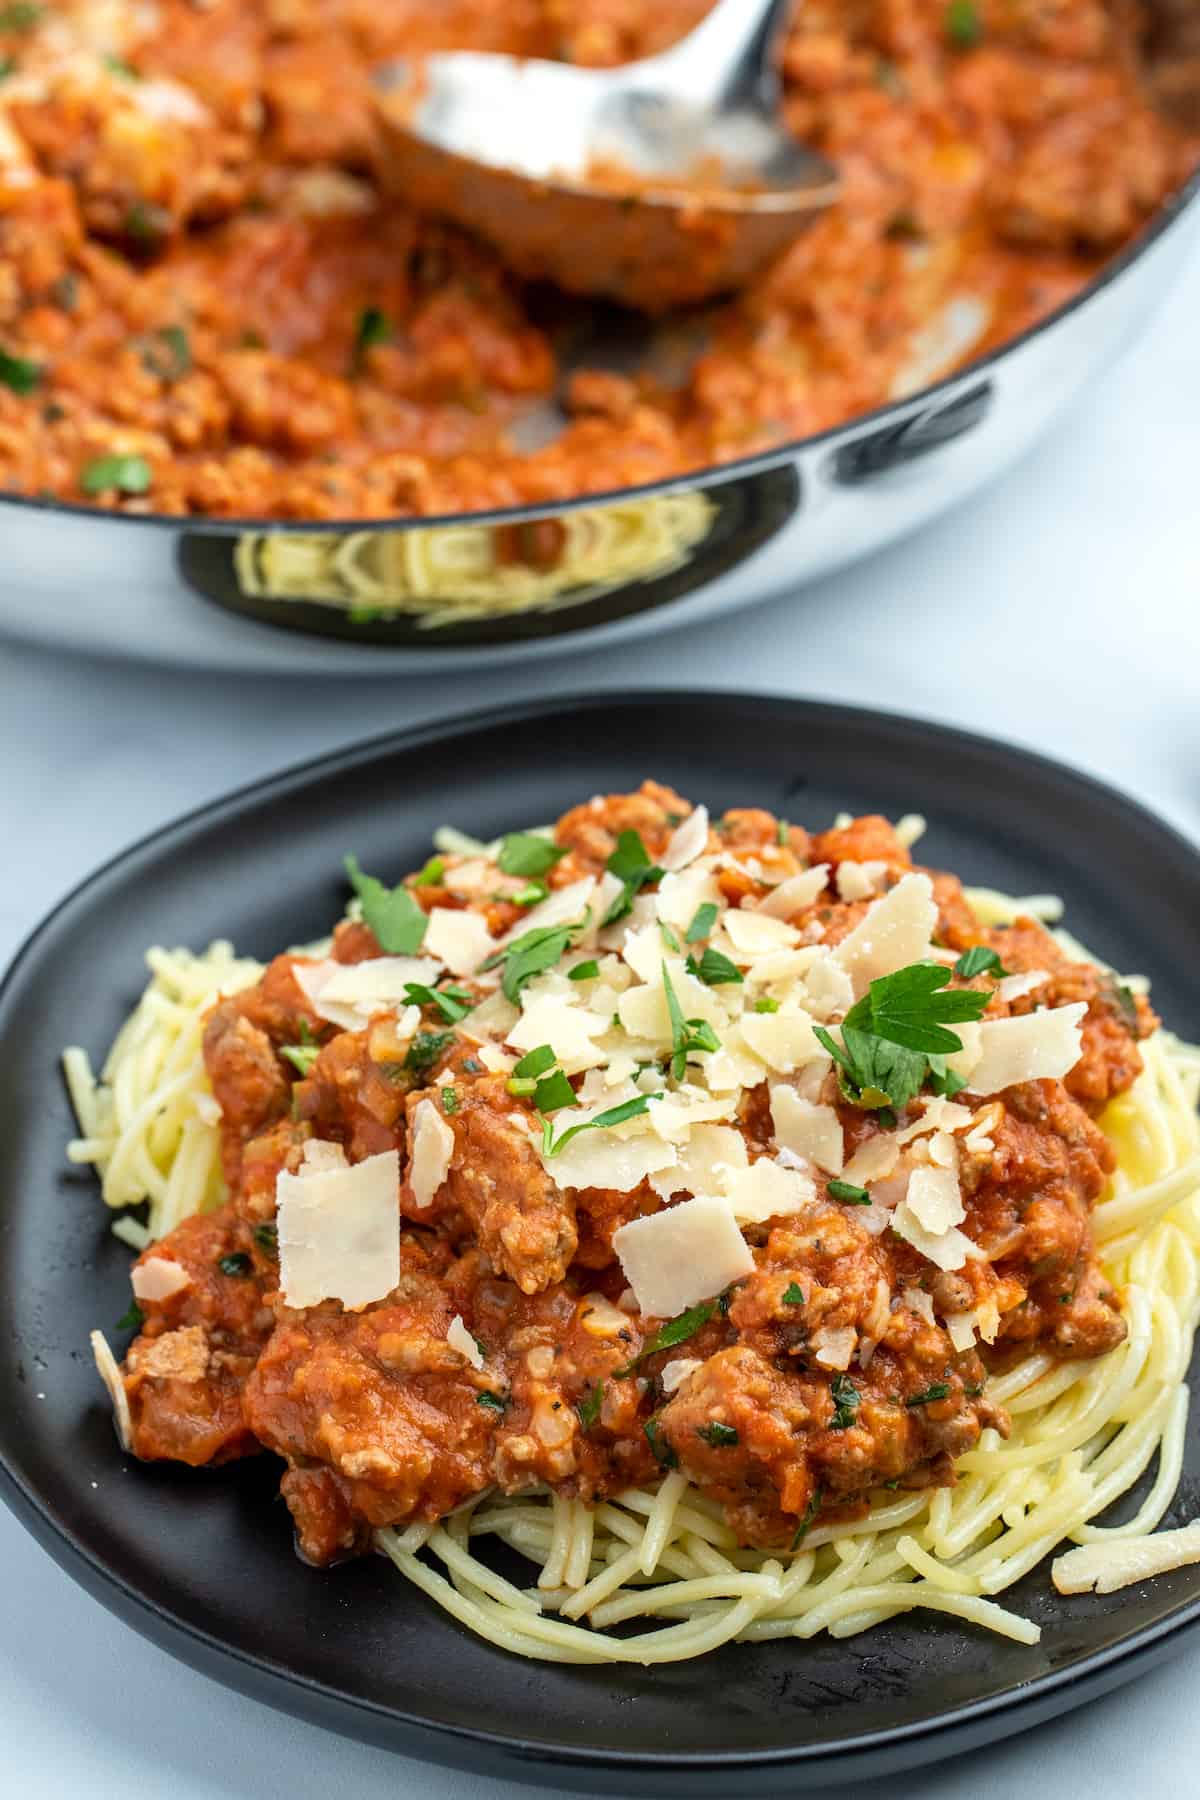 Turkey bolognese over gluten free pasta on a plate, next to a skillet of bolognese